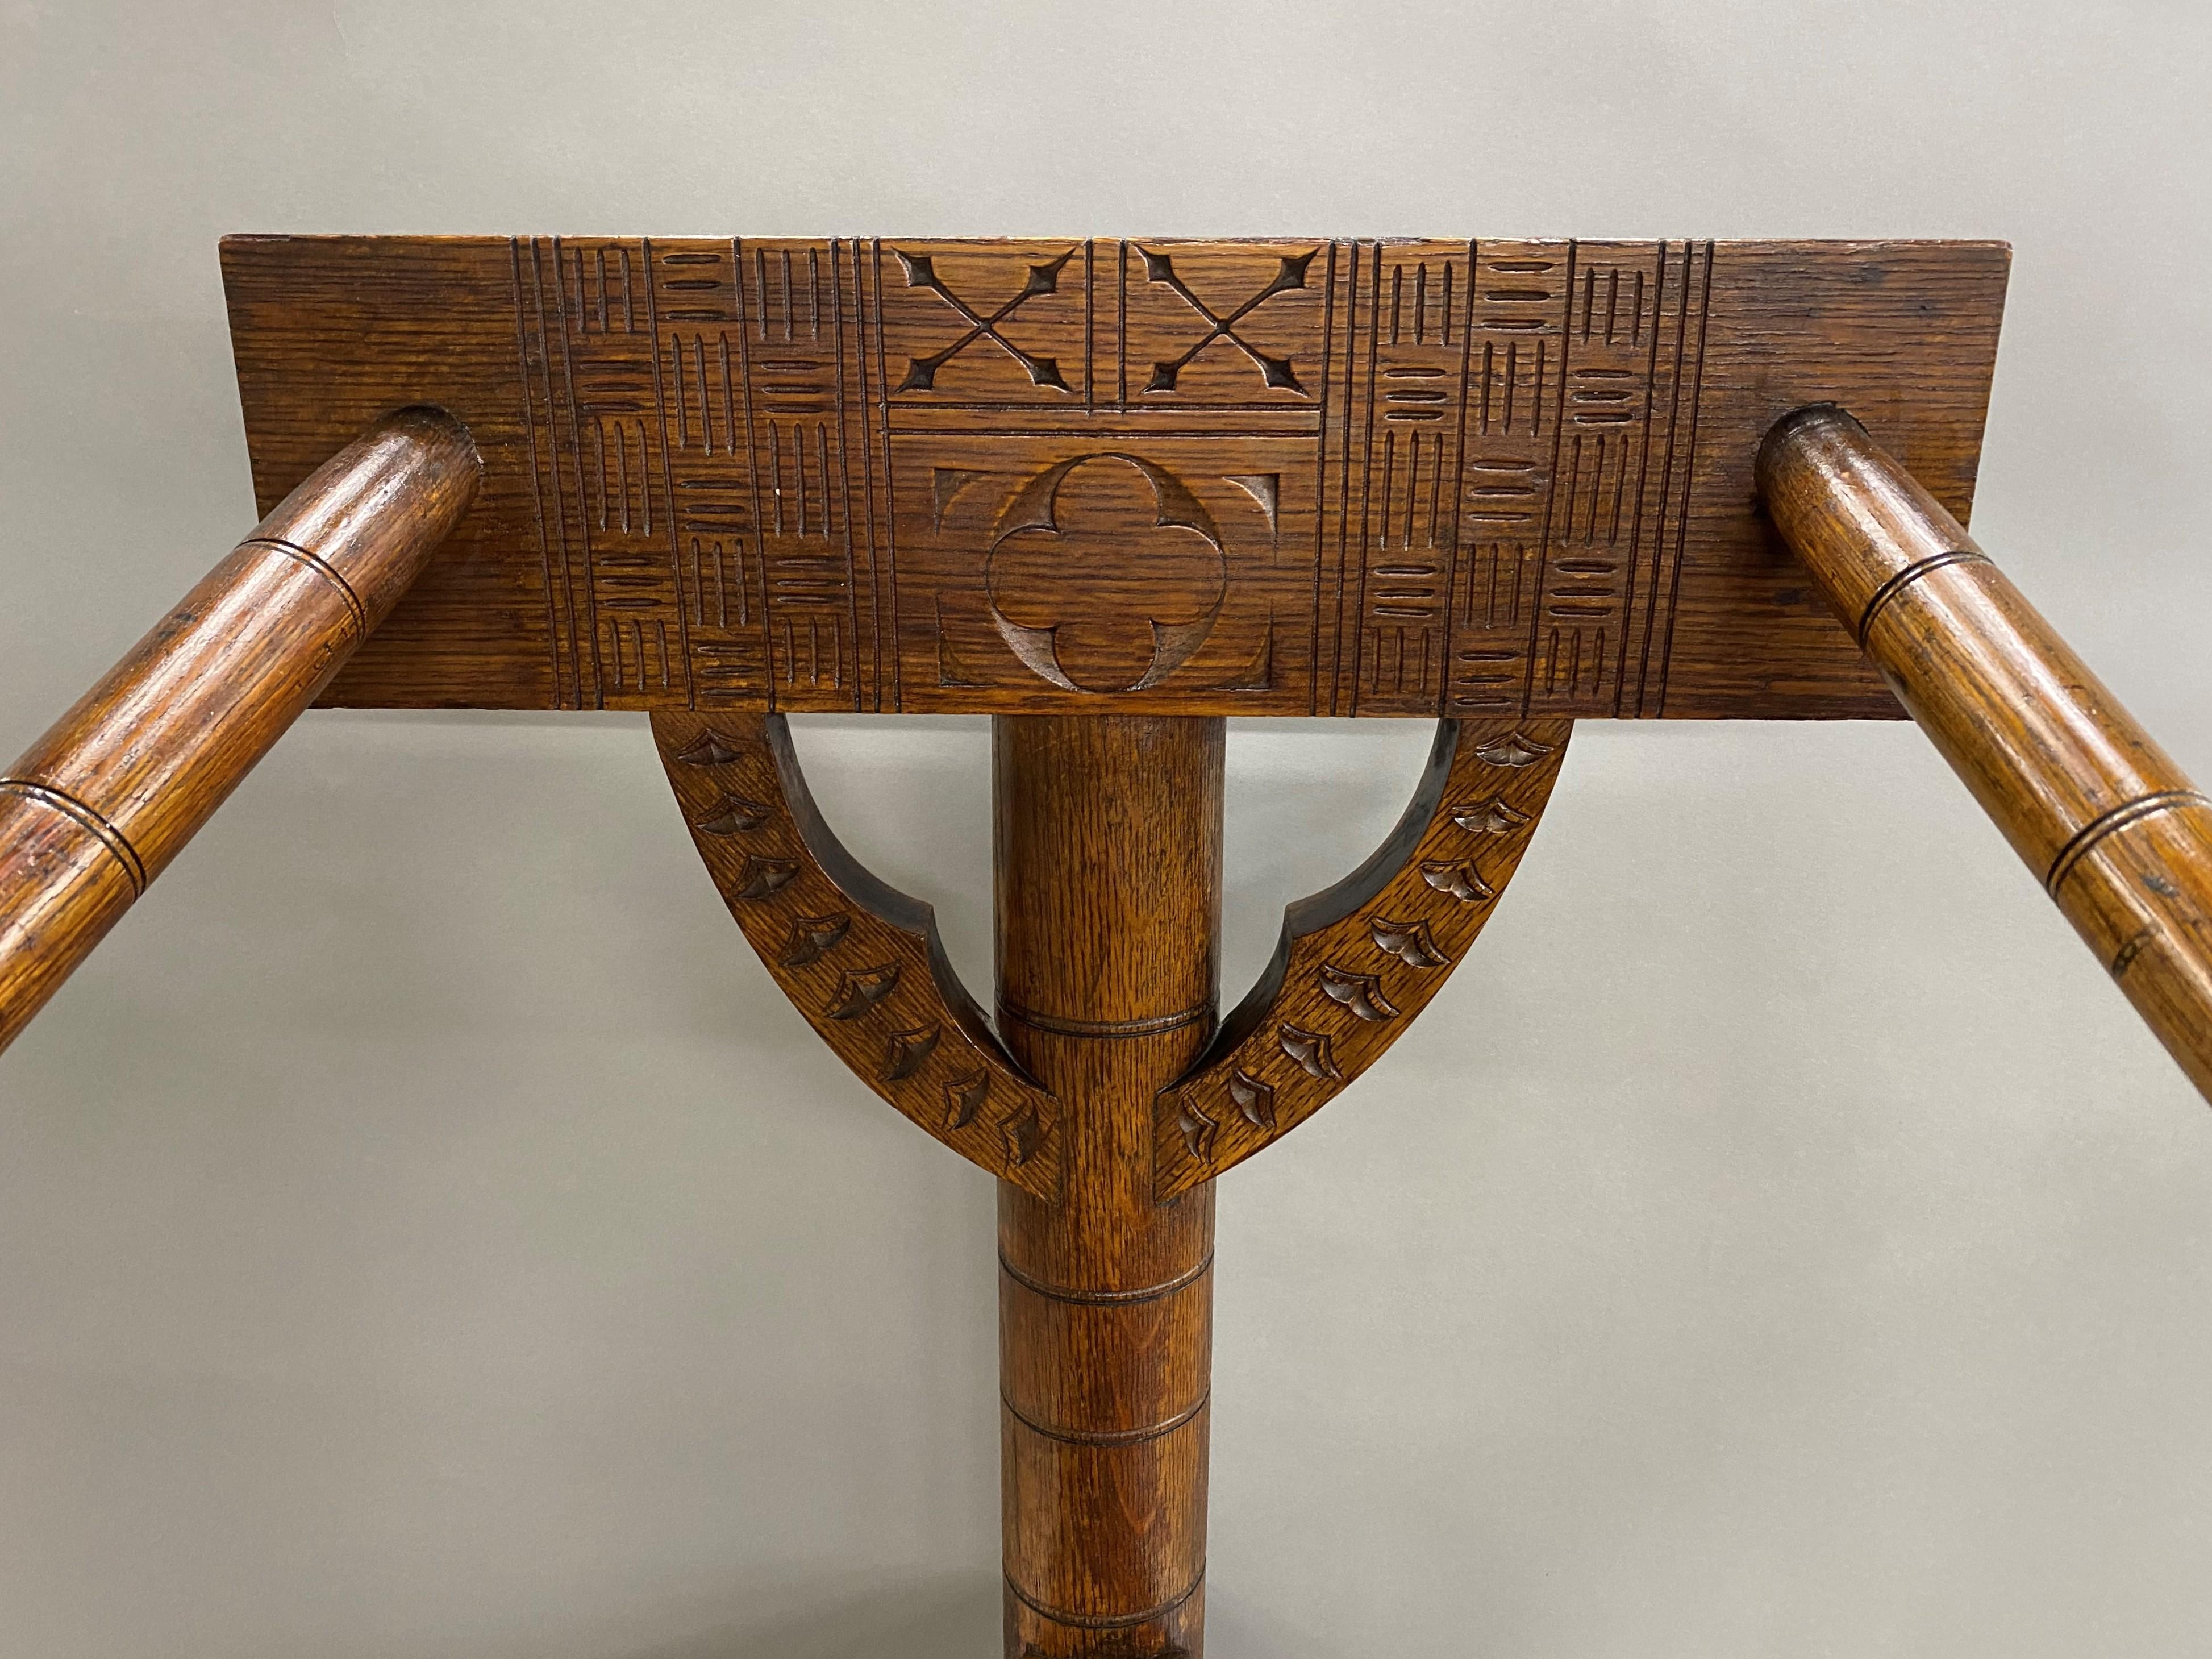 A fine example of a sturdy pilgrim century style carved oak Turner's corner chair. Similar to a labeled example by J.B.Cheyney and Company of Warwick, England, circa 1900. (See photograph of label, note that this label is not on this chair). Chair